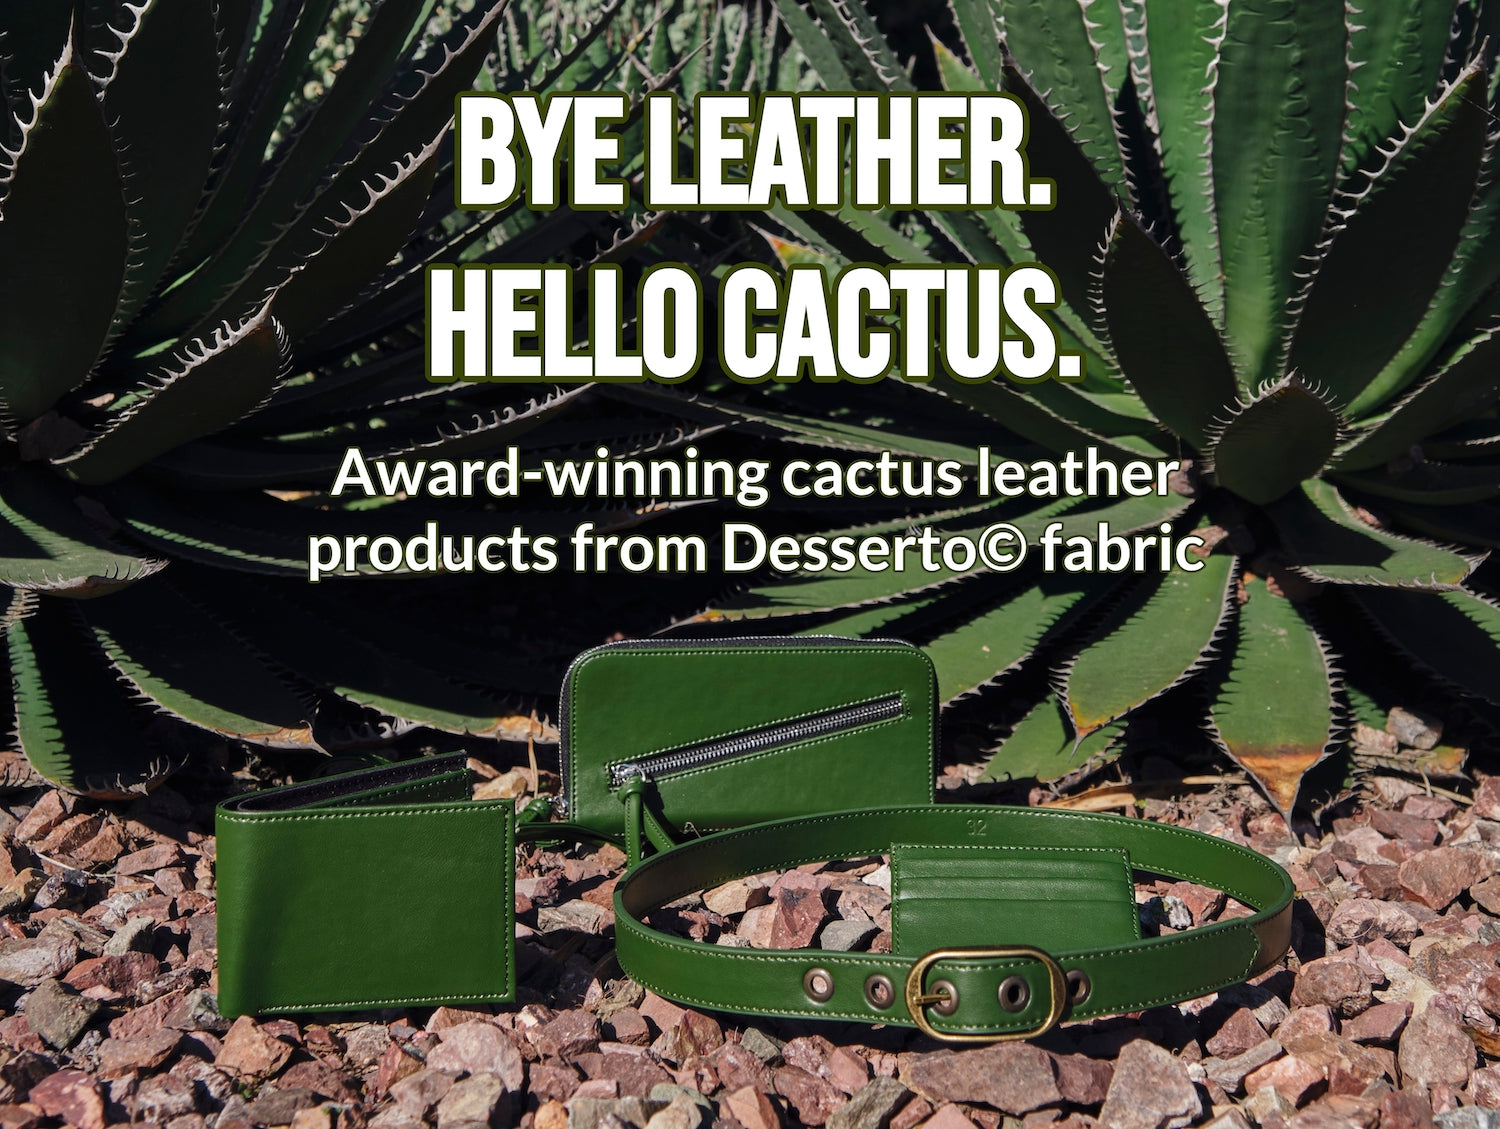 Cactus Leather Belts, Wallets, & Accessories